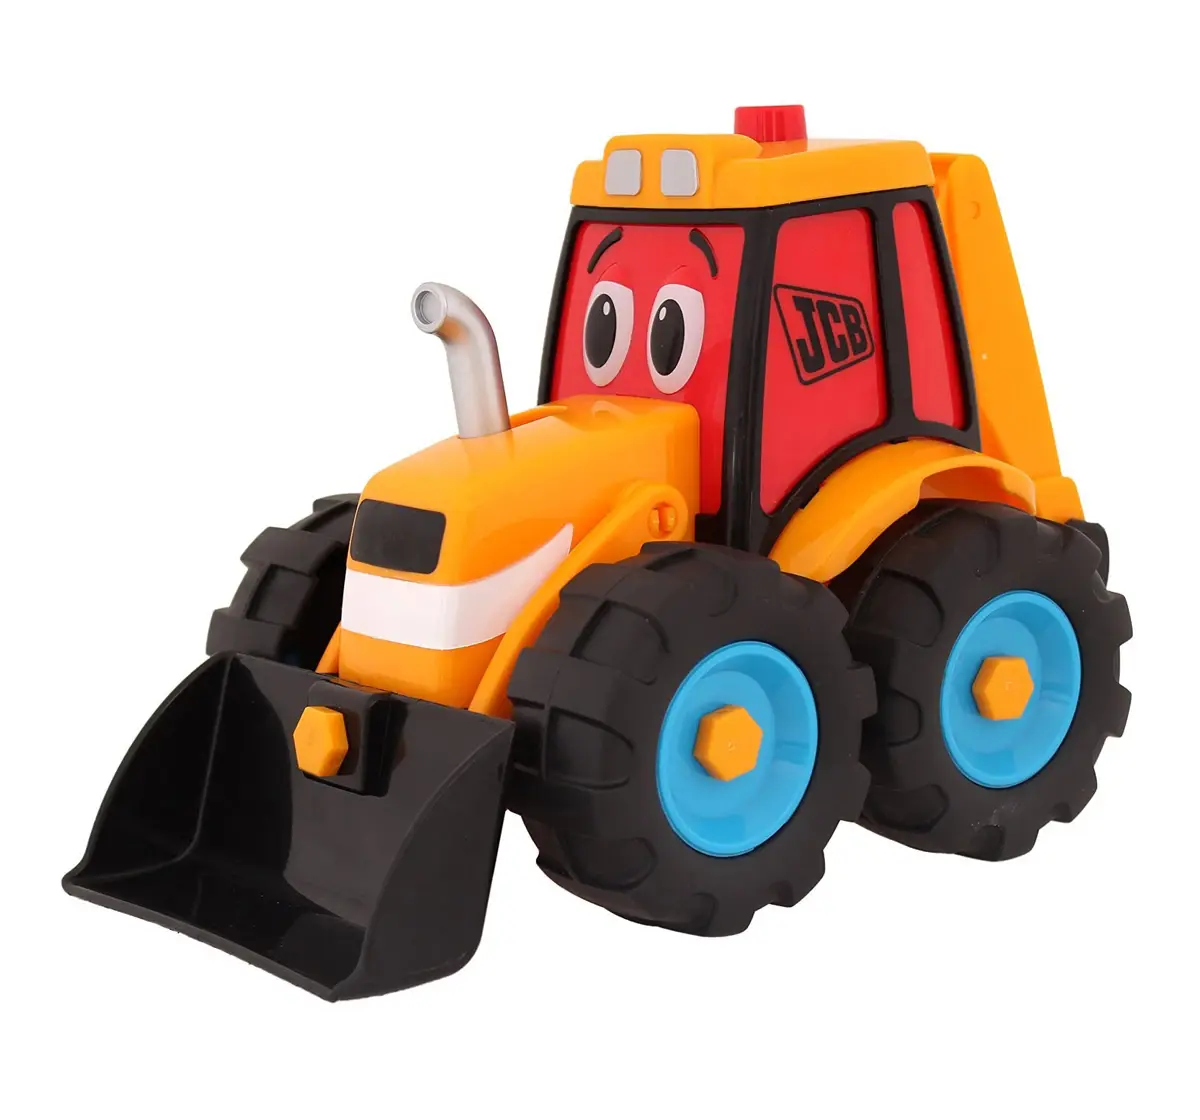 JCB My first Build and Go Digger Construction Toys for kids 12M+, Multicolour